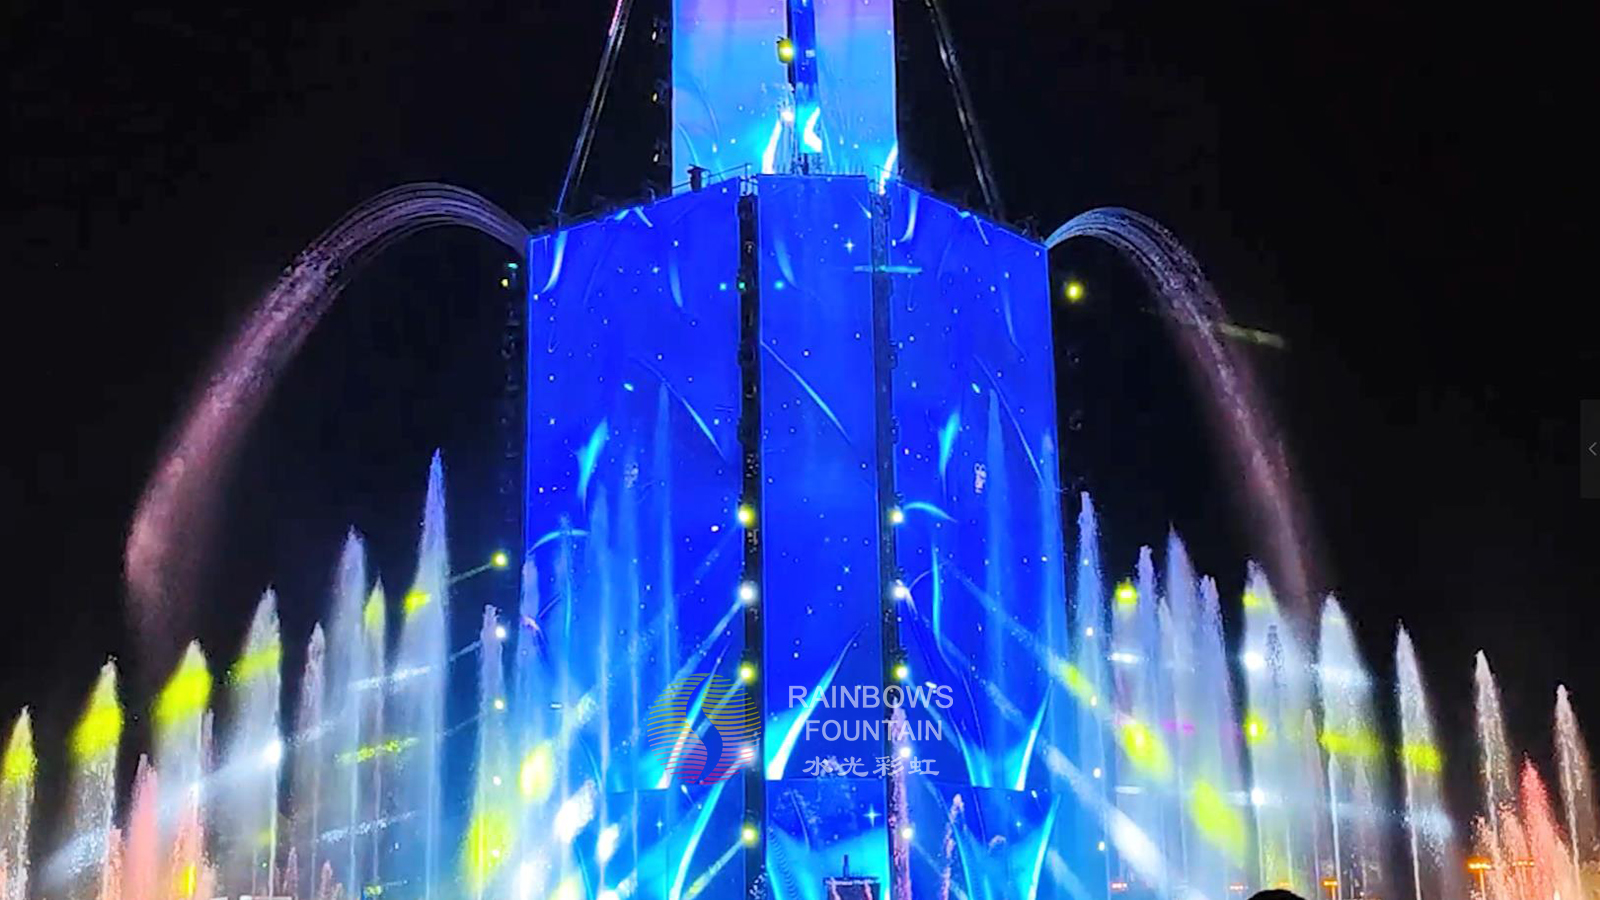 Multimedia Musical Fountain Show in de VAE voor Sheikh Zayed Festival